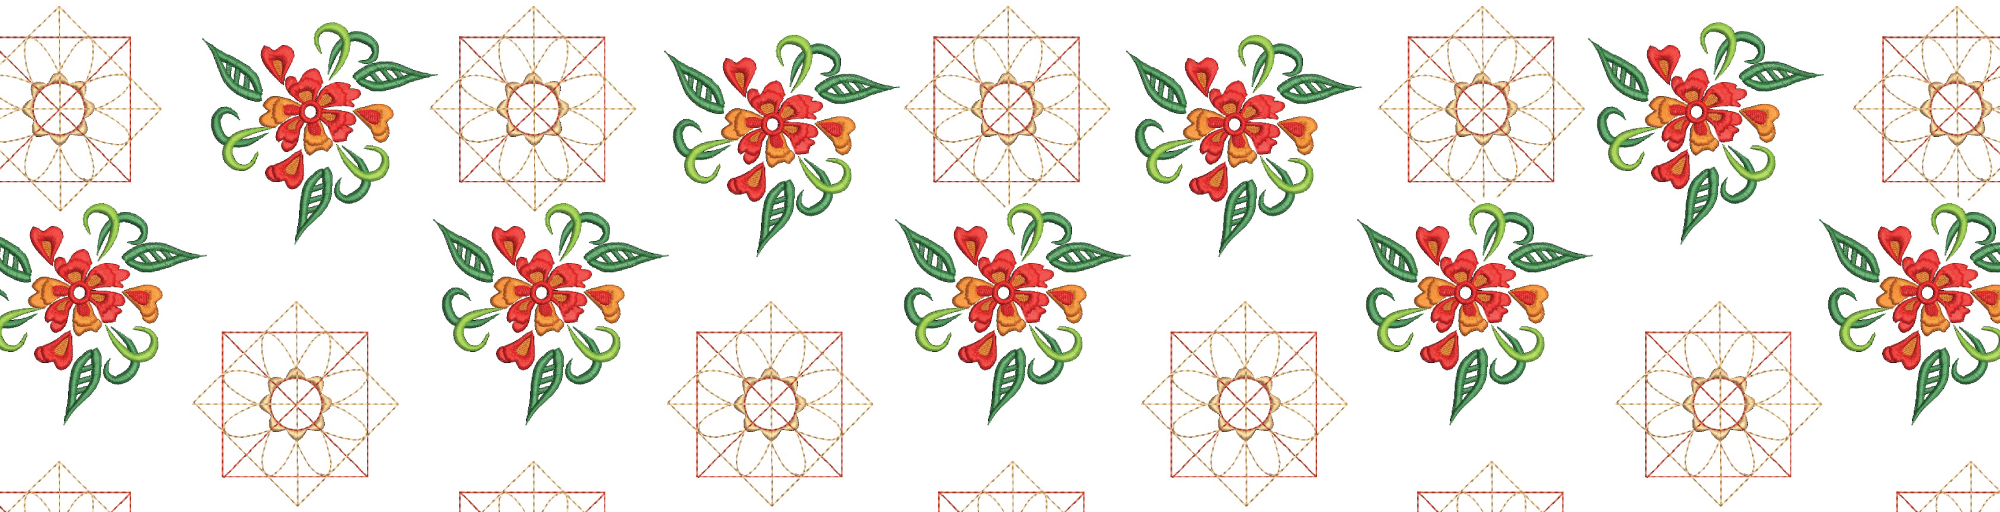 free embroidery designs to download jef